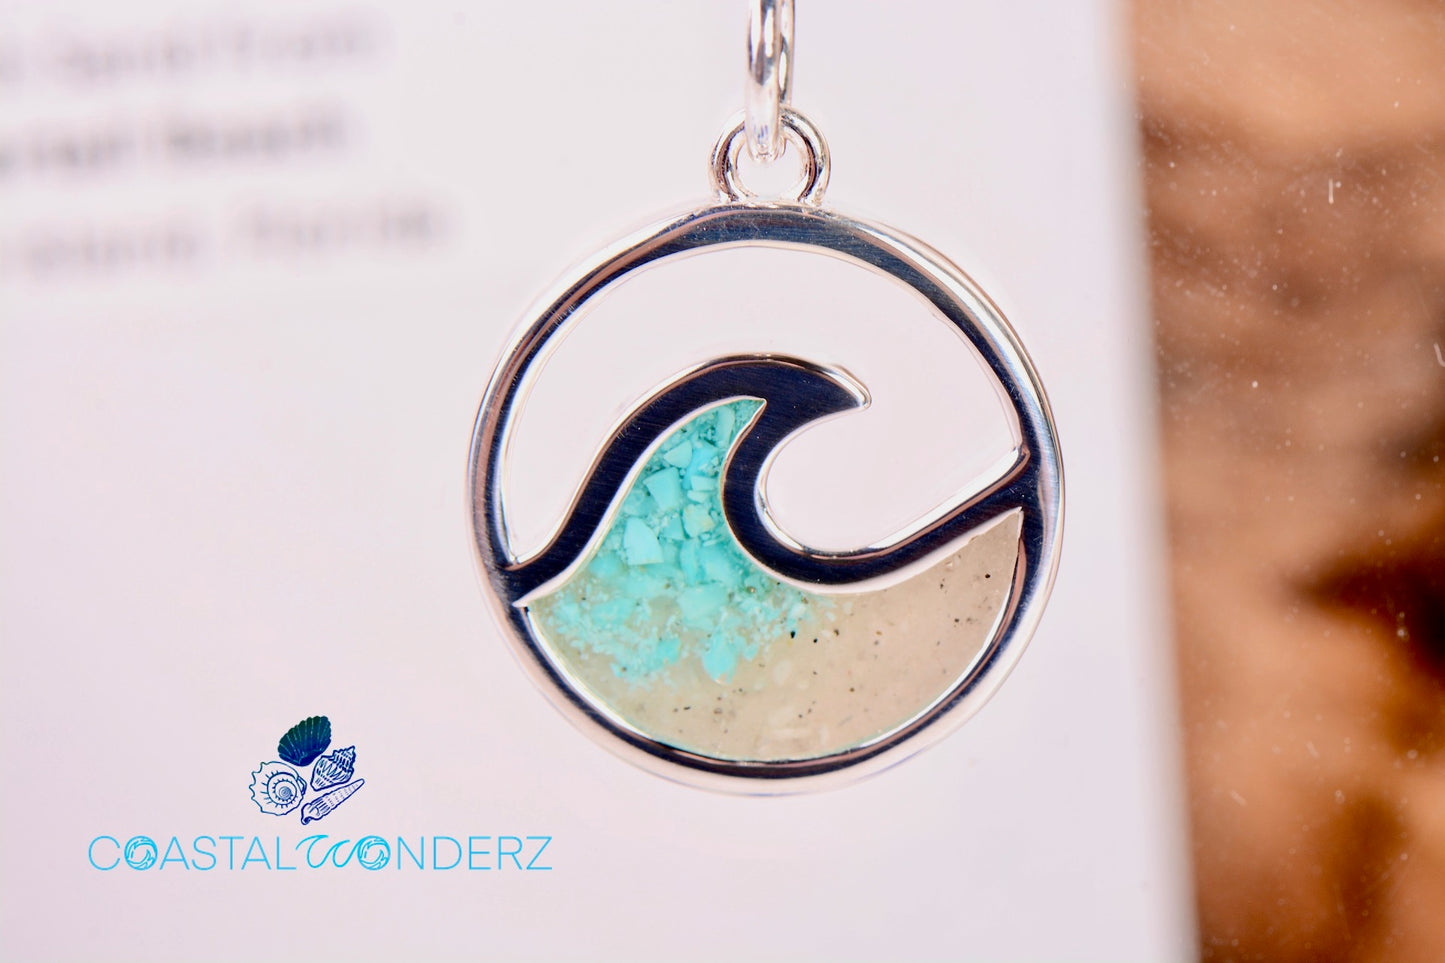 Cresting Wave Necklace with Turquoise Gradient